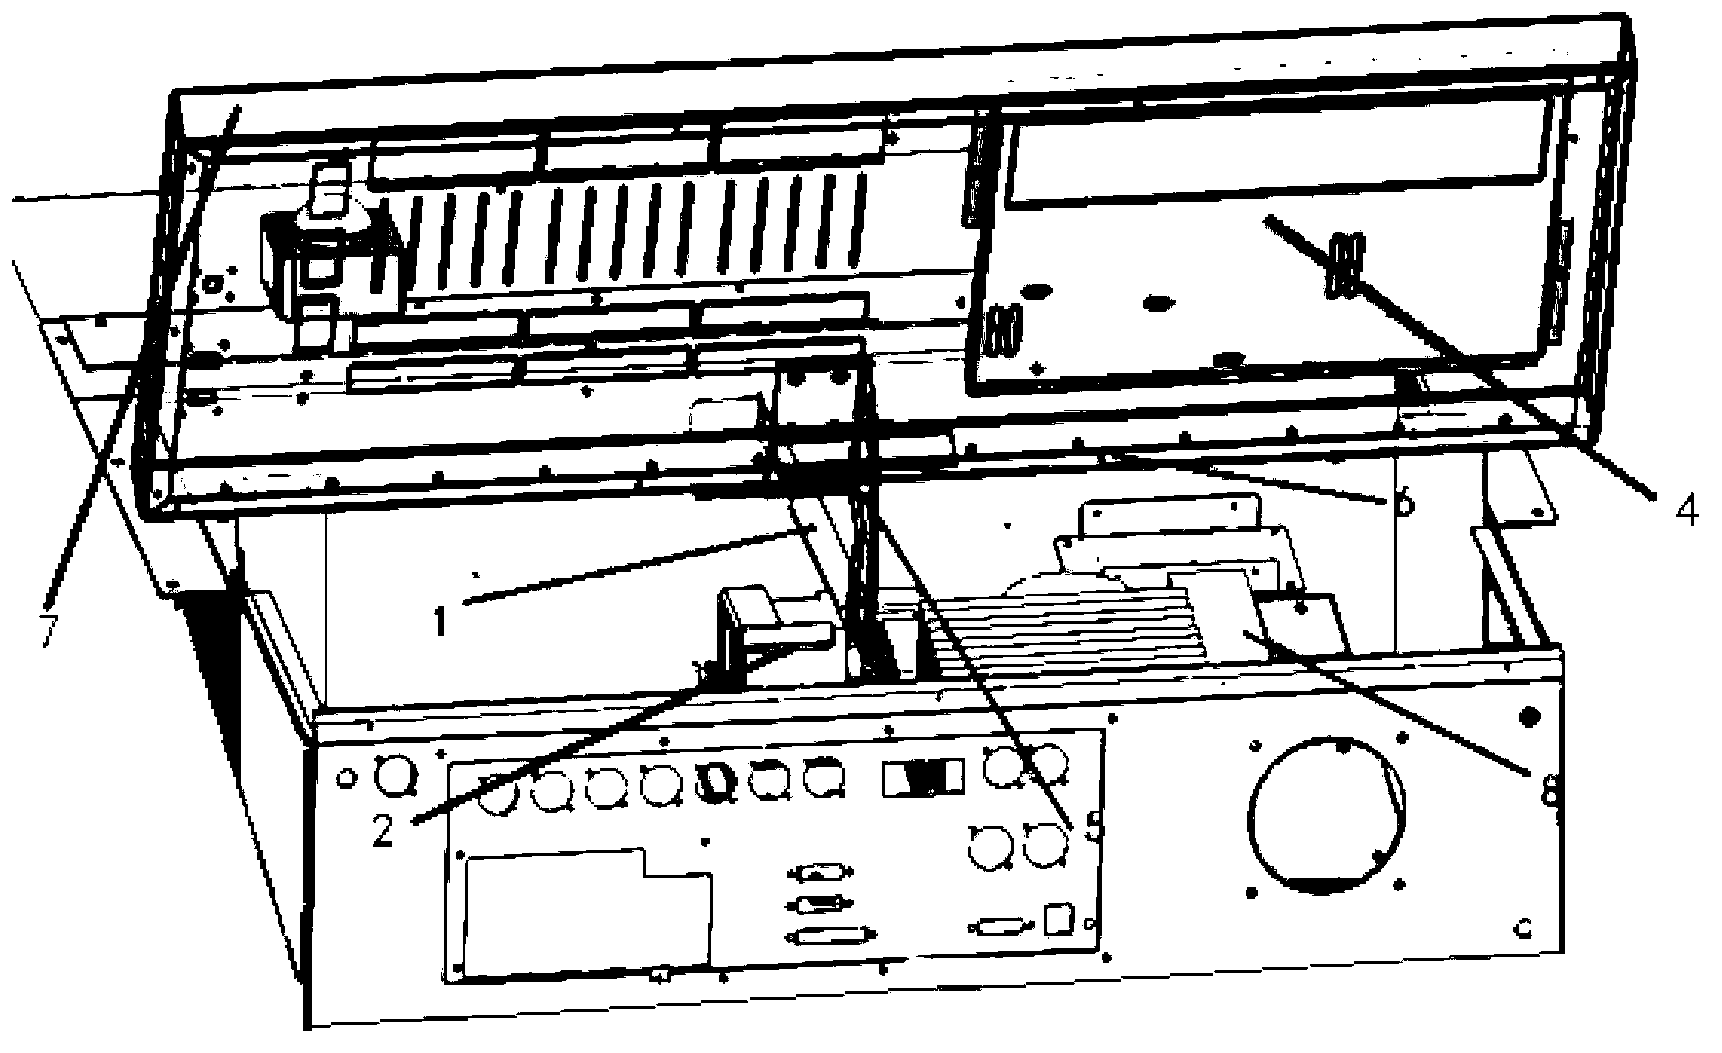 Single-screen lifting control system of lighting control console